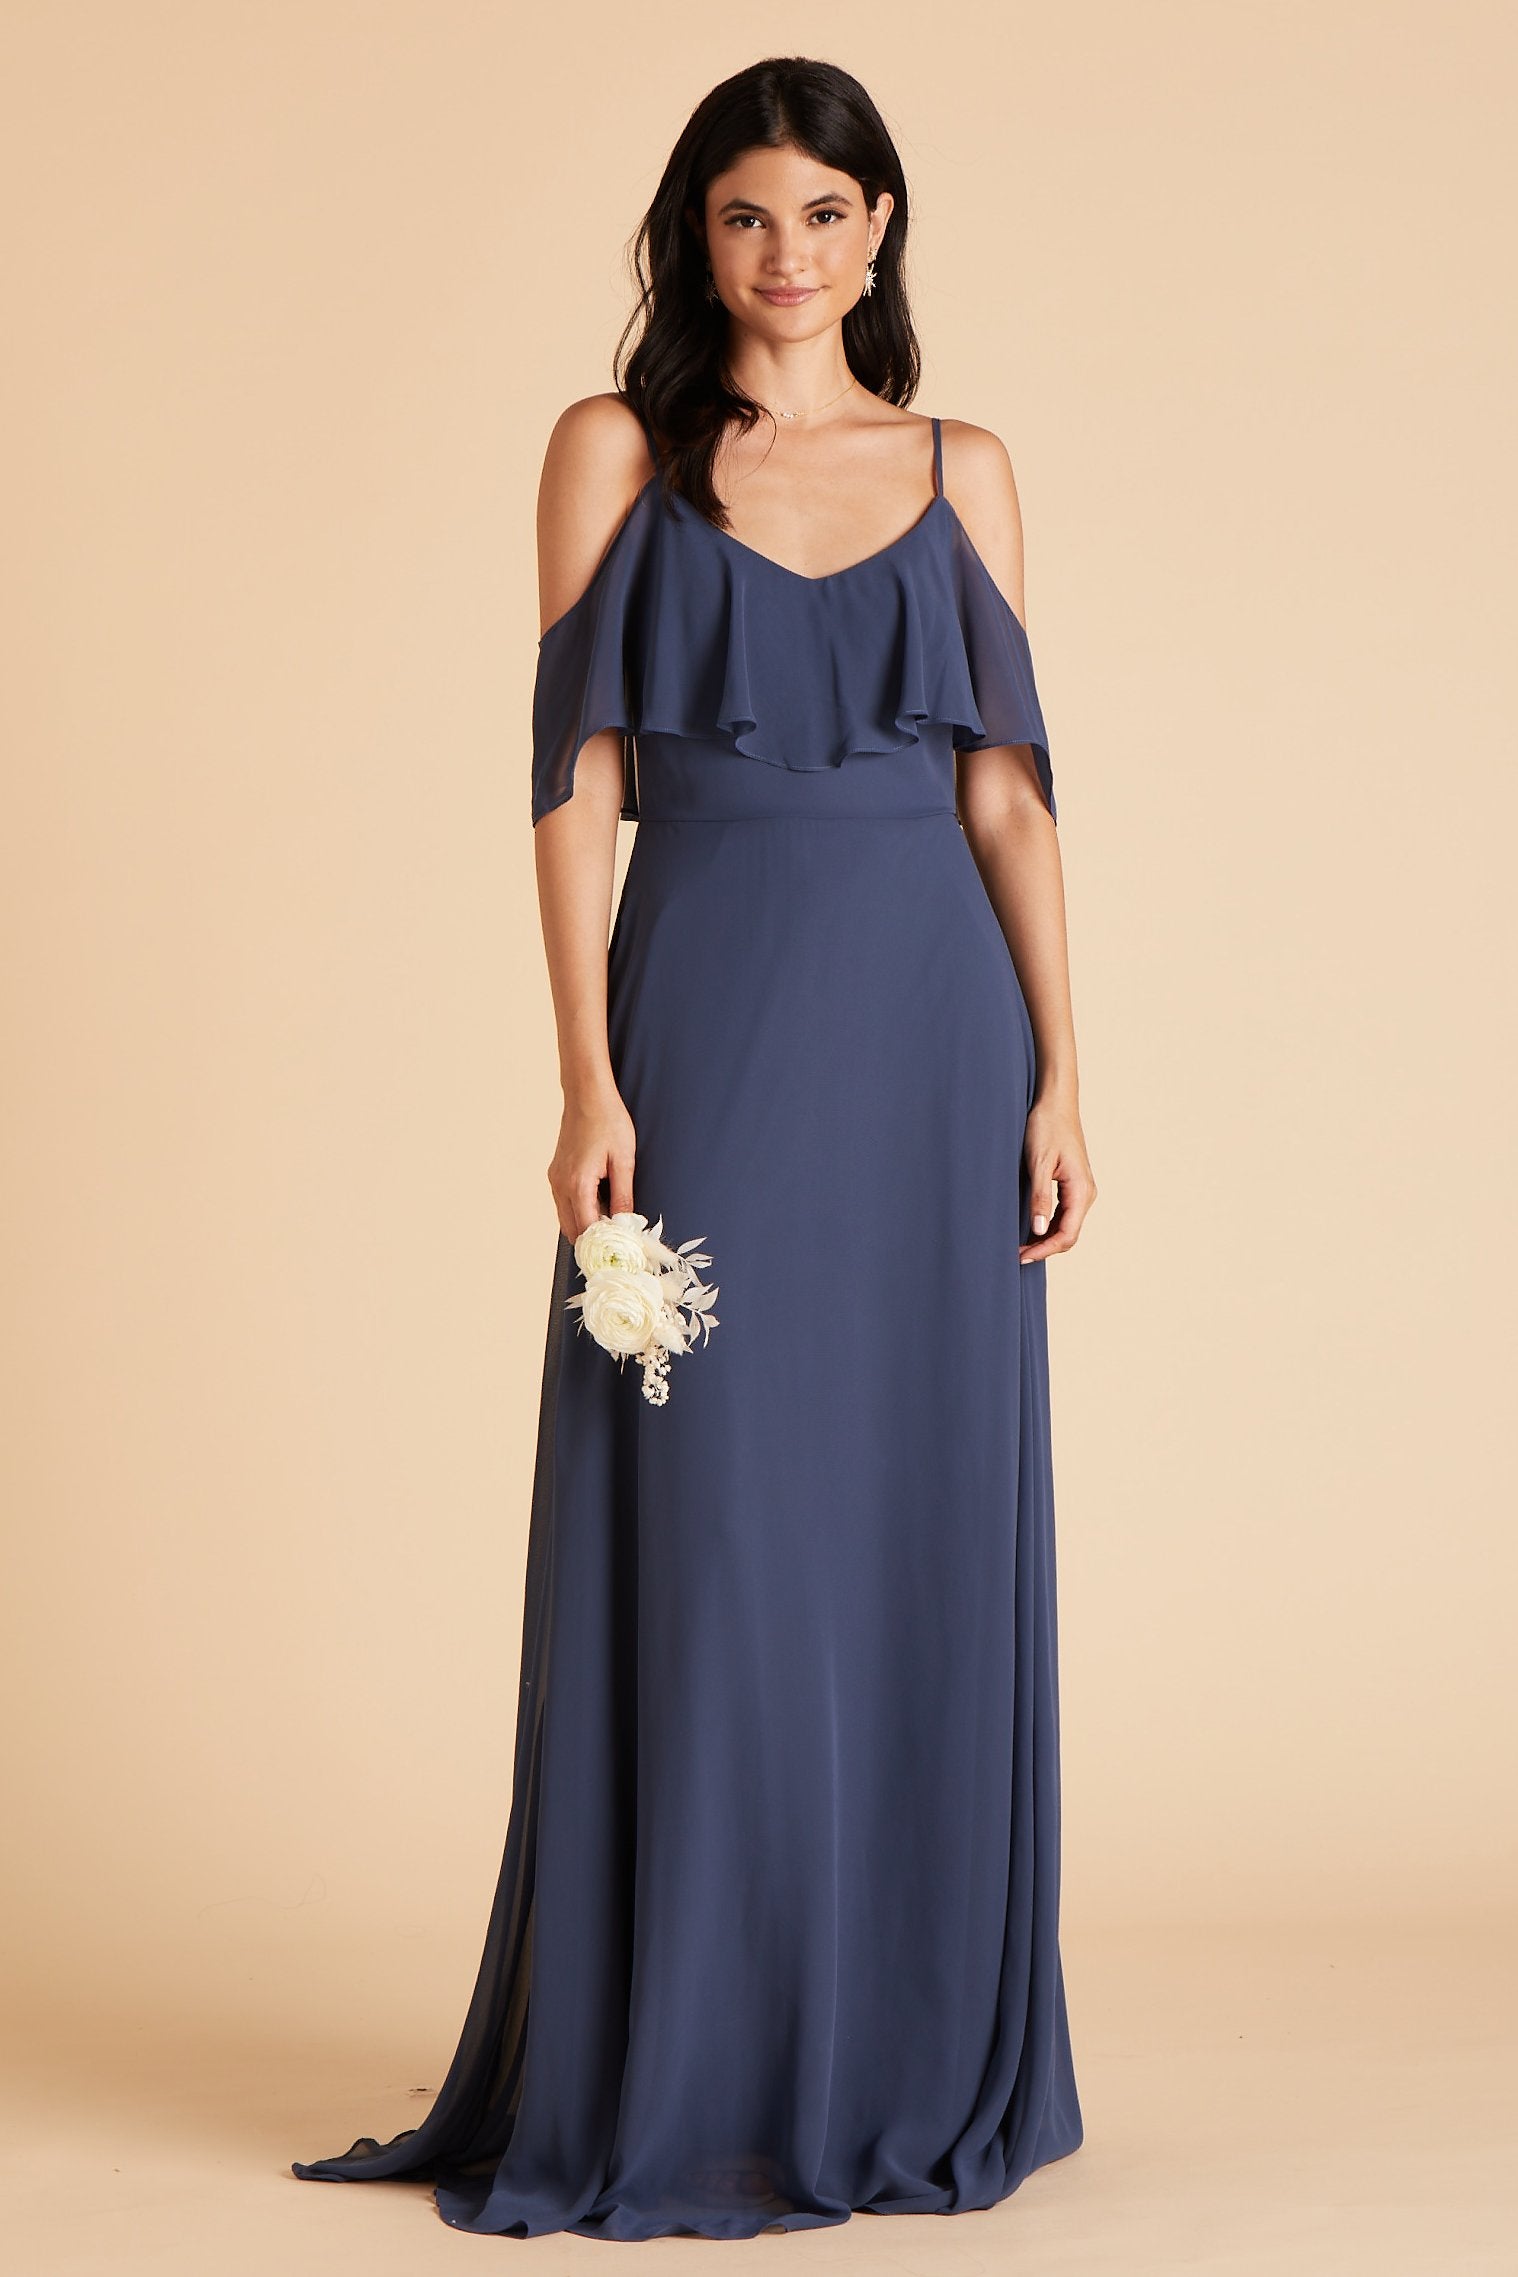 Jane convertible bridesmaid dress in slate blue chiffon by Birdy Grey, front view